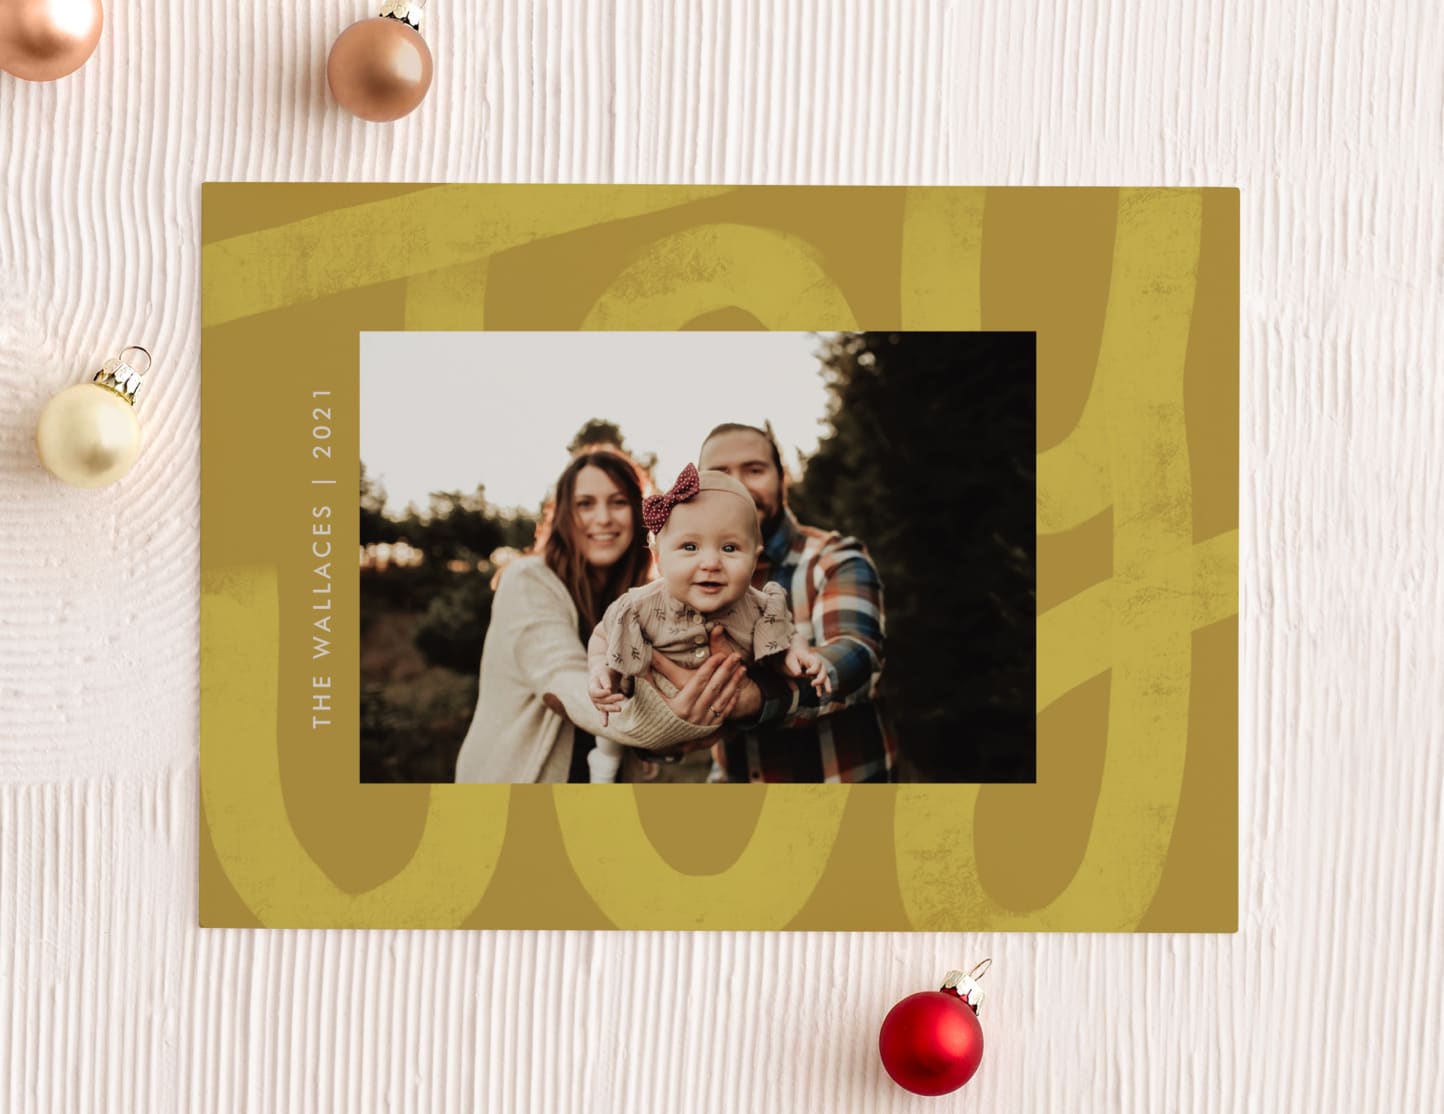 Tone on tone holiday card trend